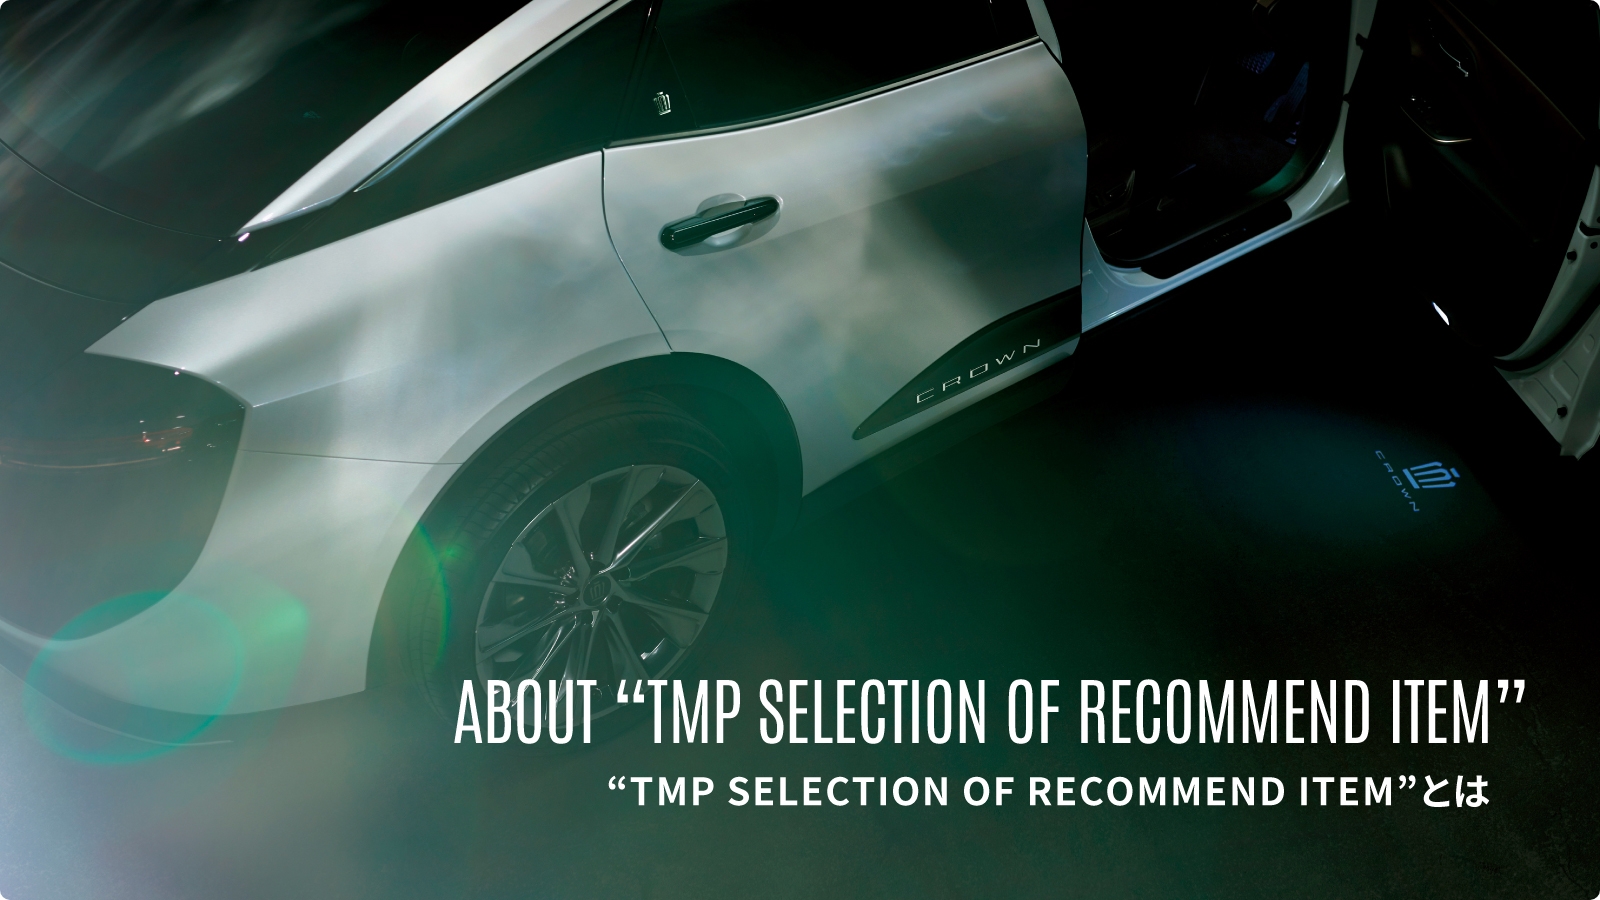 “TMP SELECTION OF RECOMMEND ITEM”とは